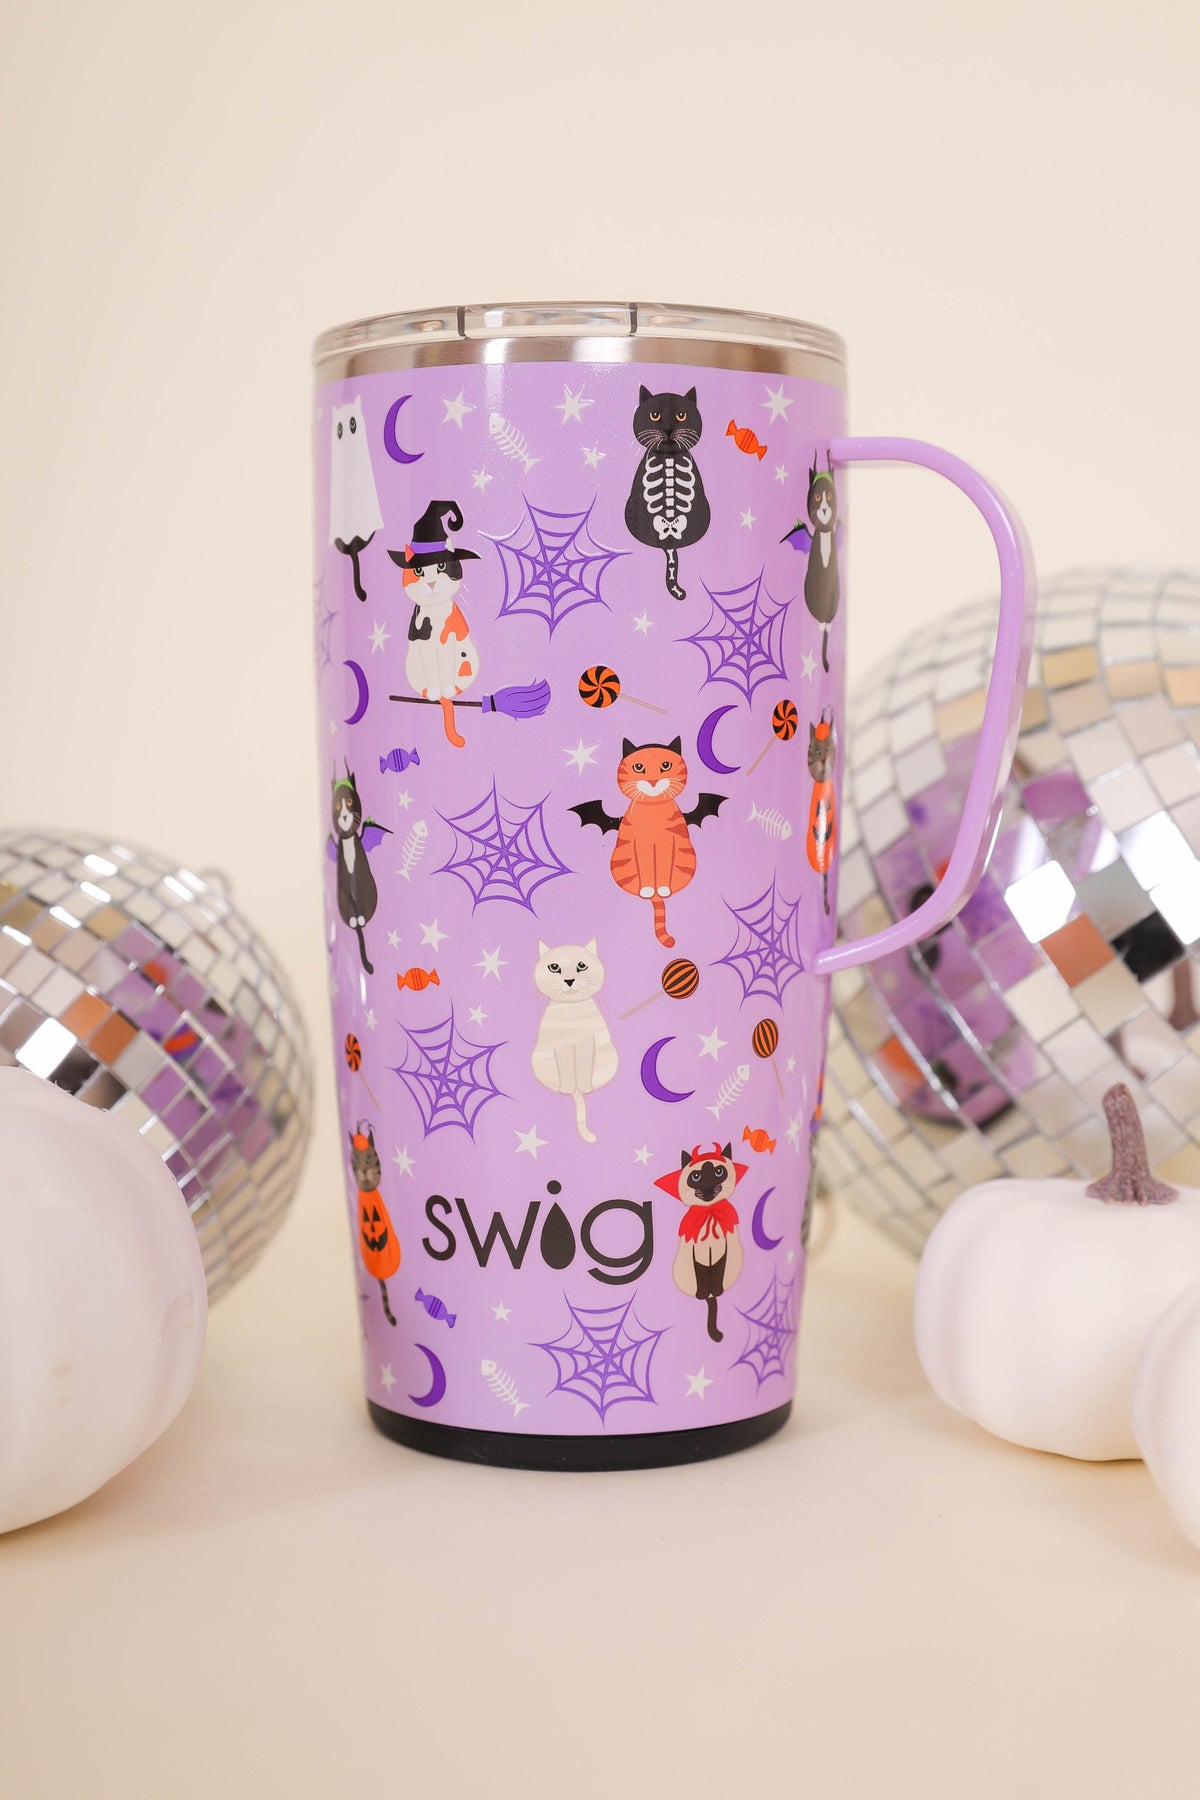 Scaredy Cat Collection - Swig Life